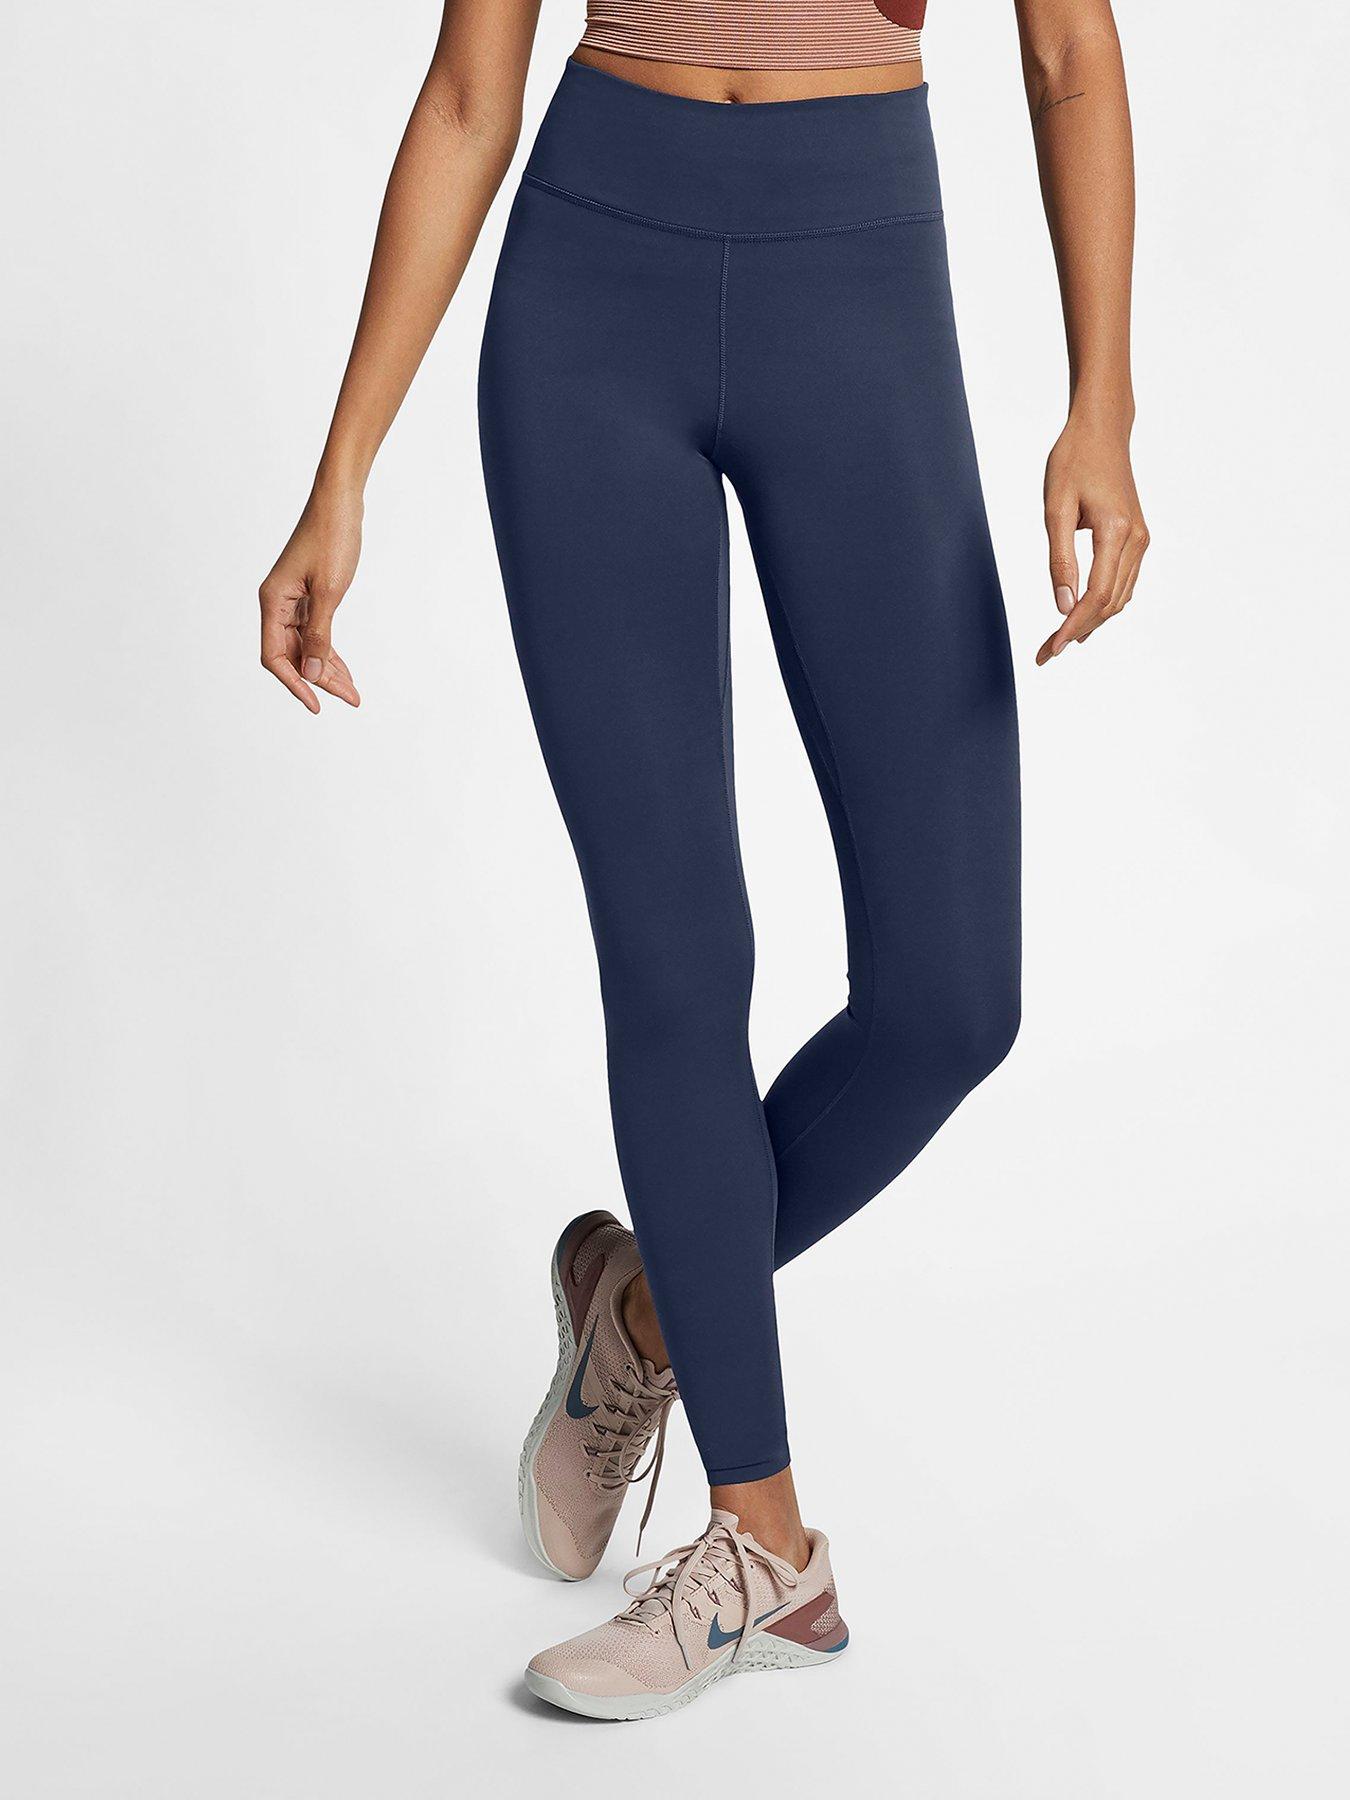 nike one luxe tights blue